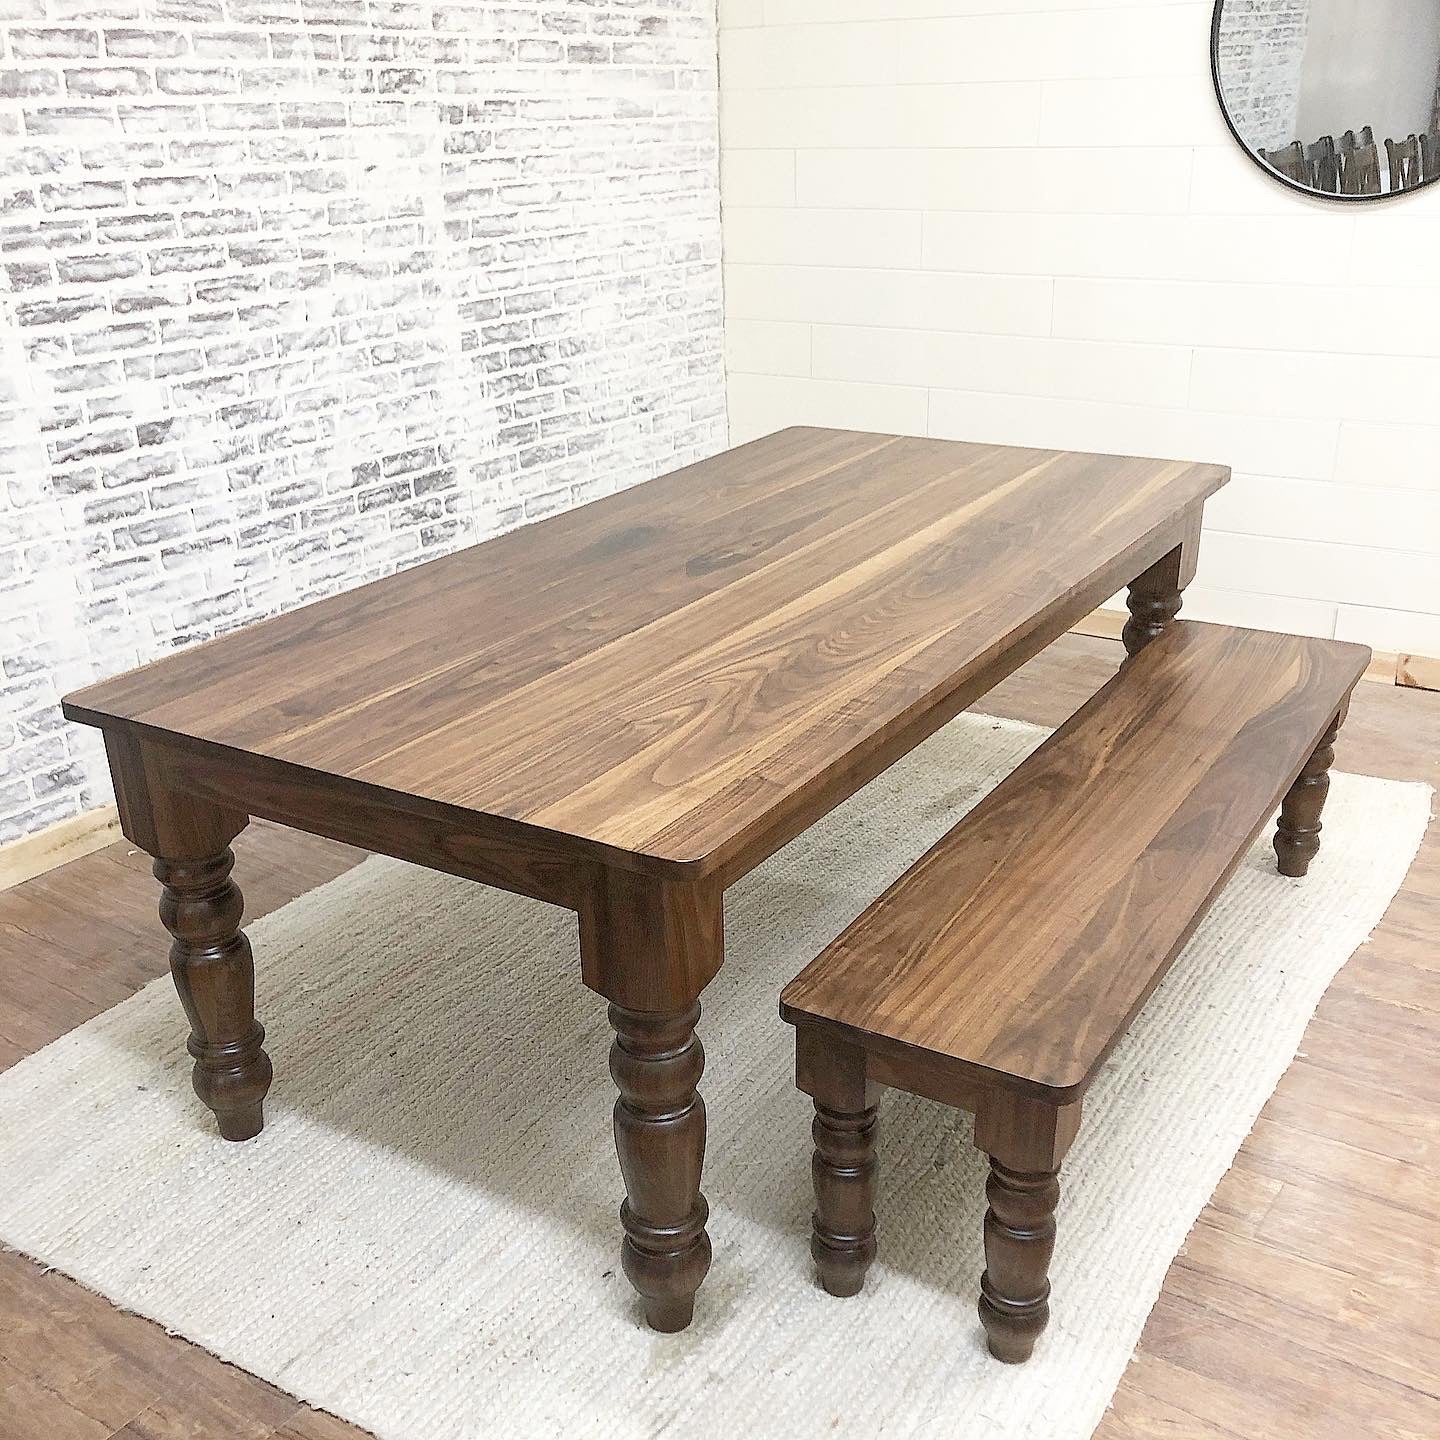 Pictured with a 7' L x 42" W Walnut Table and round corners with matching Walnut Legs and a Natural Finish. Pictured with a Matching Bench.